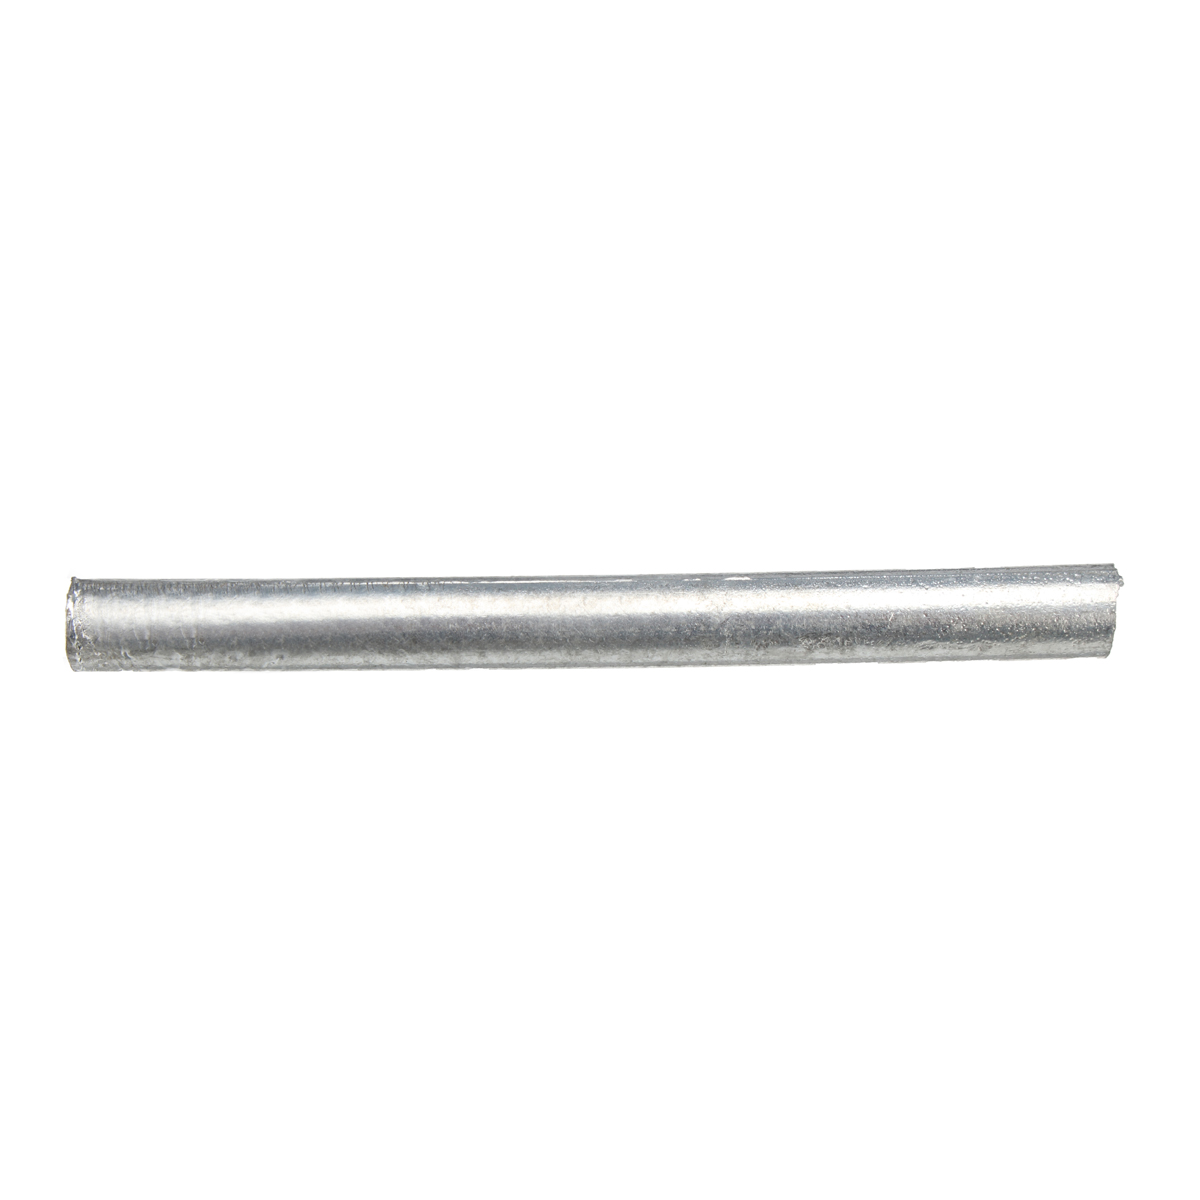 High Purity Zn Zinc Rods Solid Round Bar 16x300mm Anode Electroplating UK Stock 